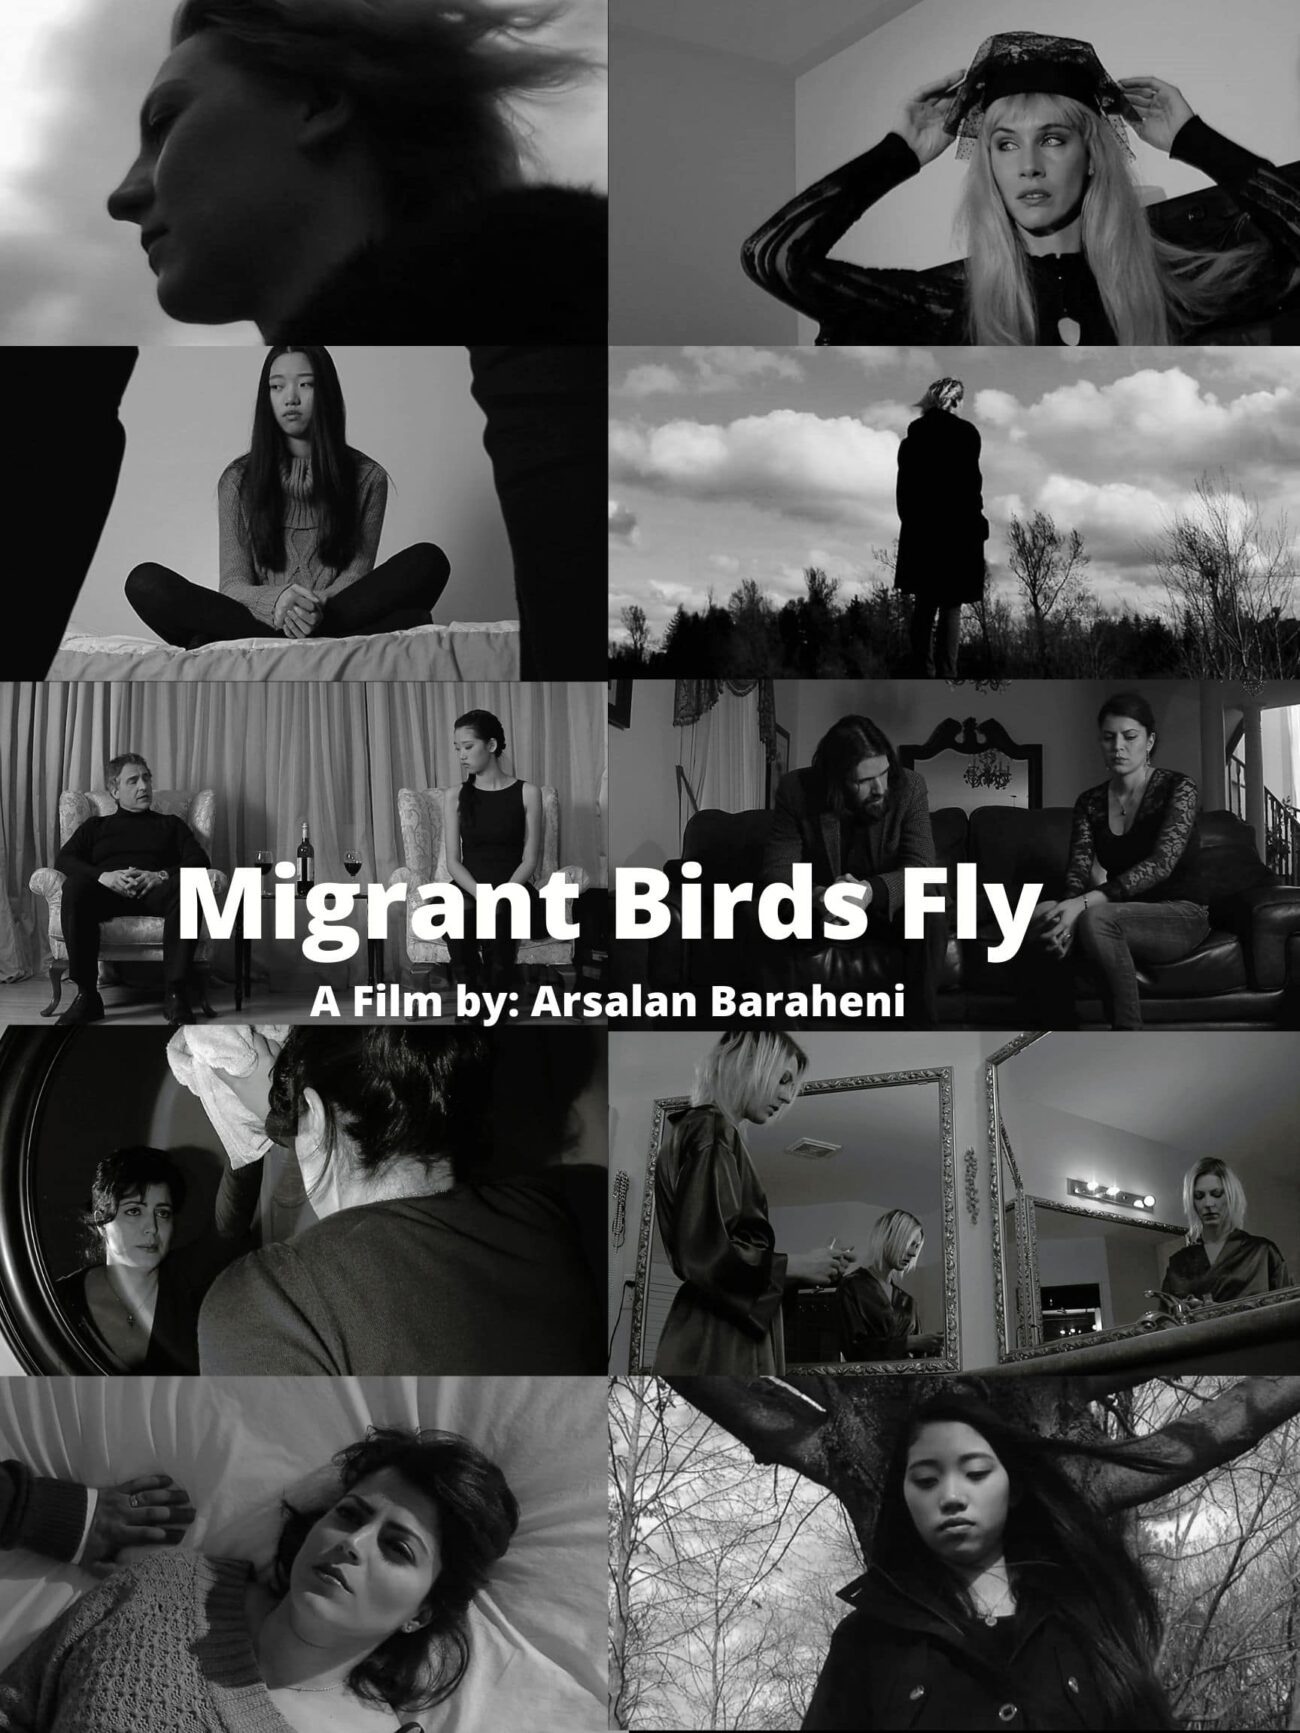 Arsalan Baraheni's latest groundbreaking independent feature will premiere at the Malibu International Film Festival. Get excited for 'Migrant Birds Fly'.